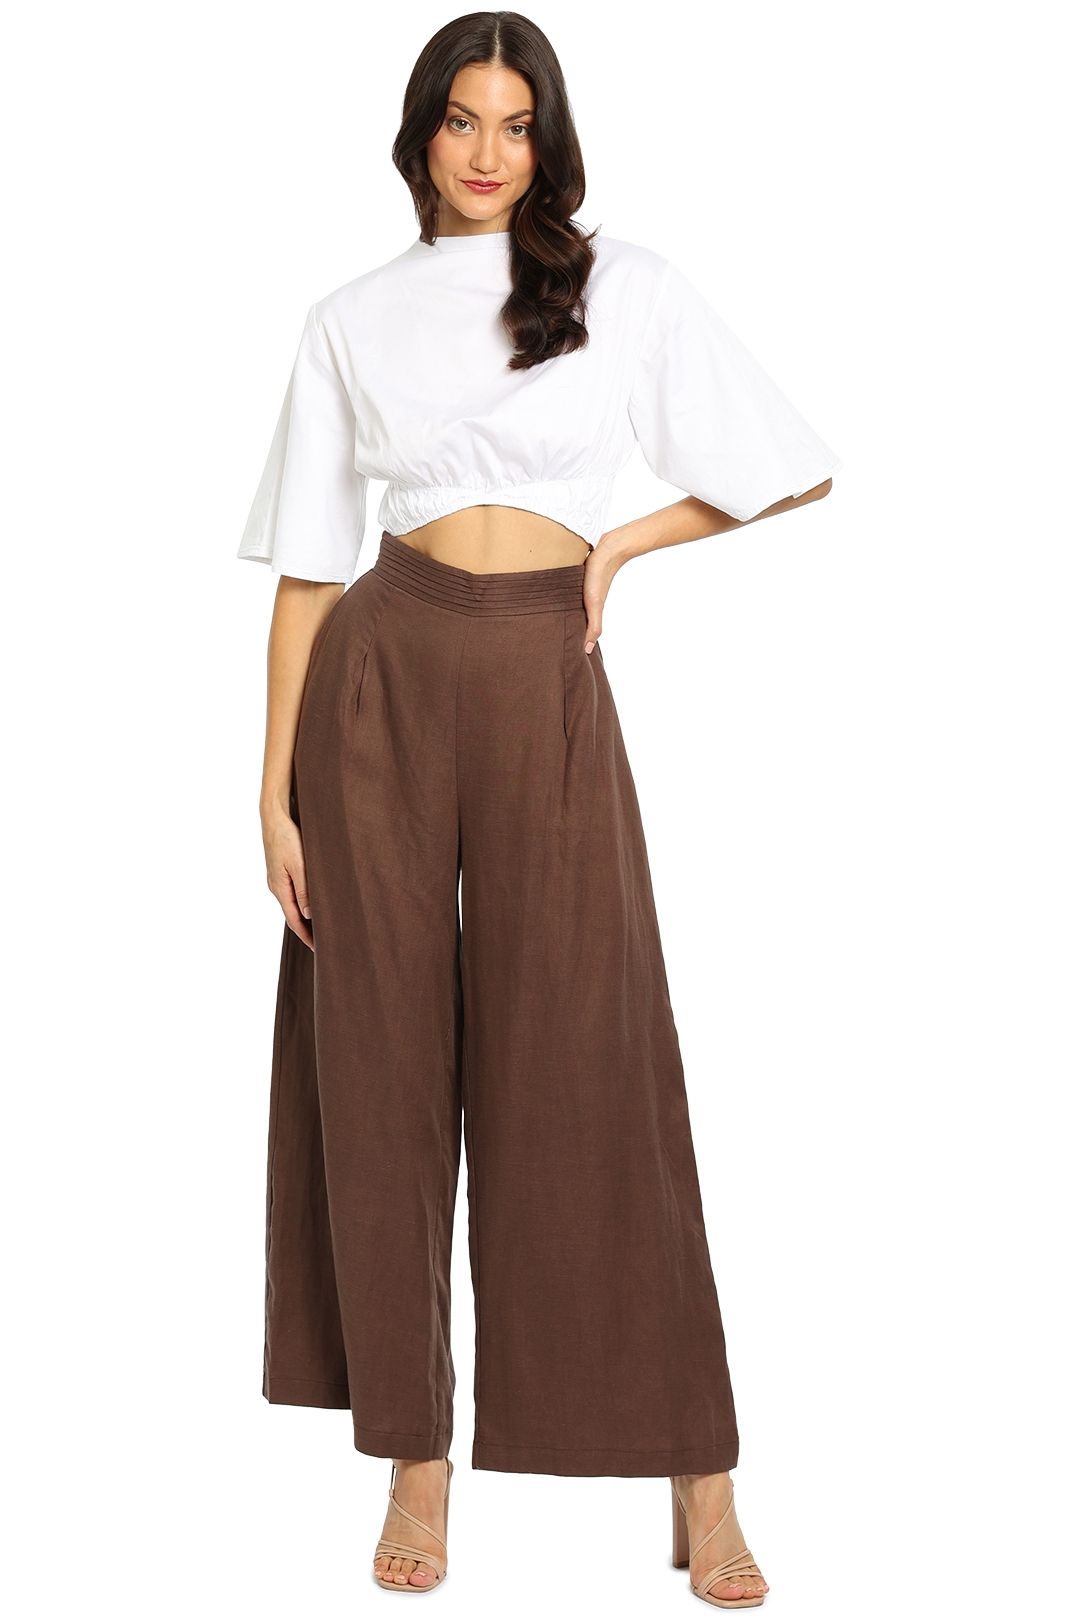 Ministry of Style Elysian Wide Leg Pant